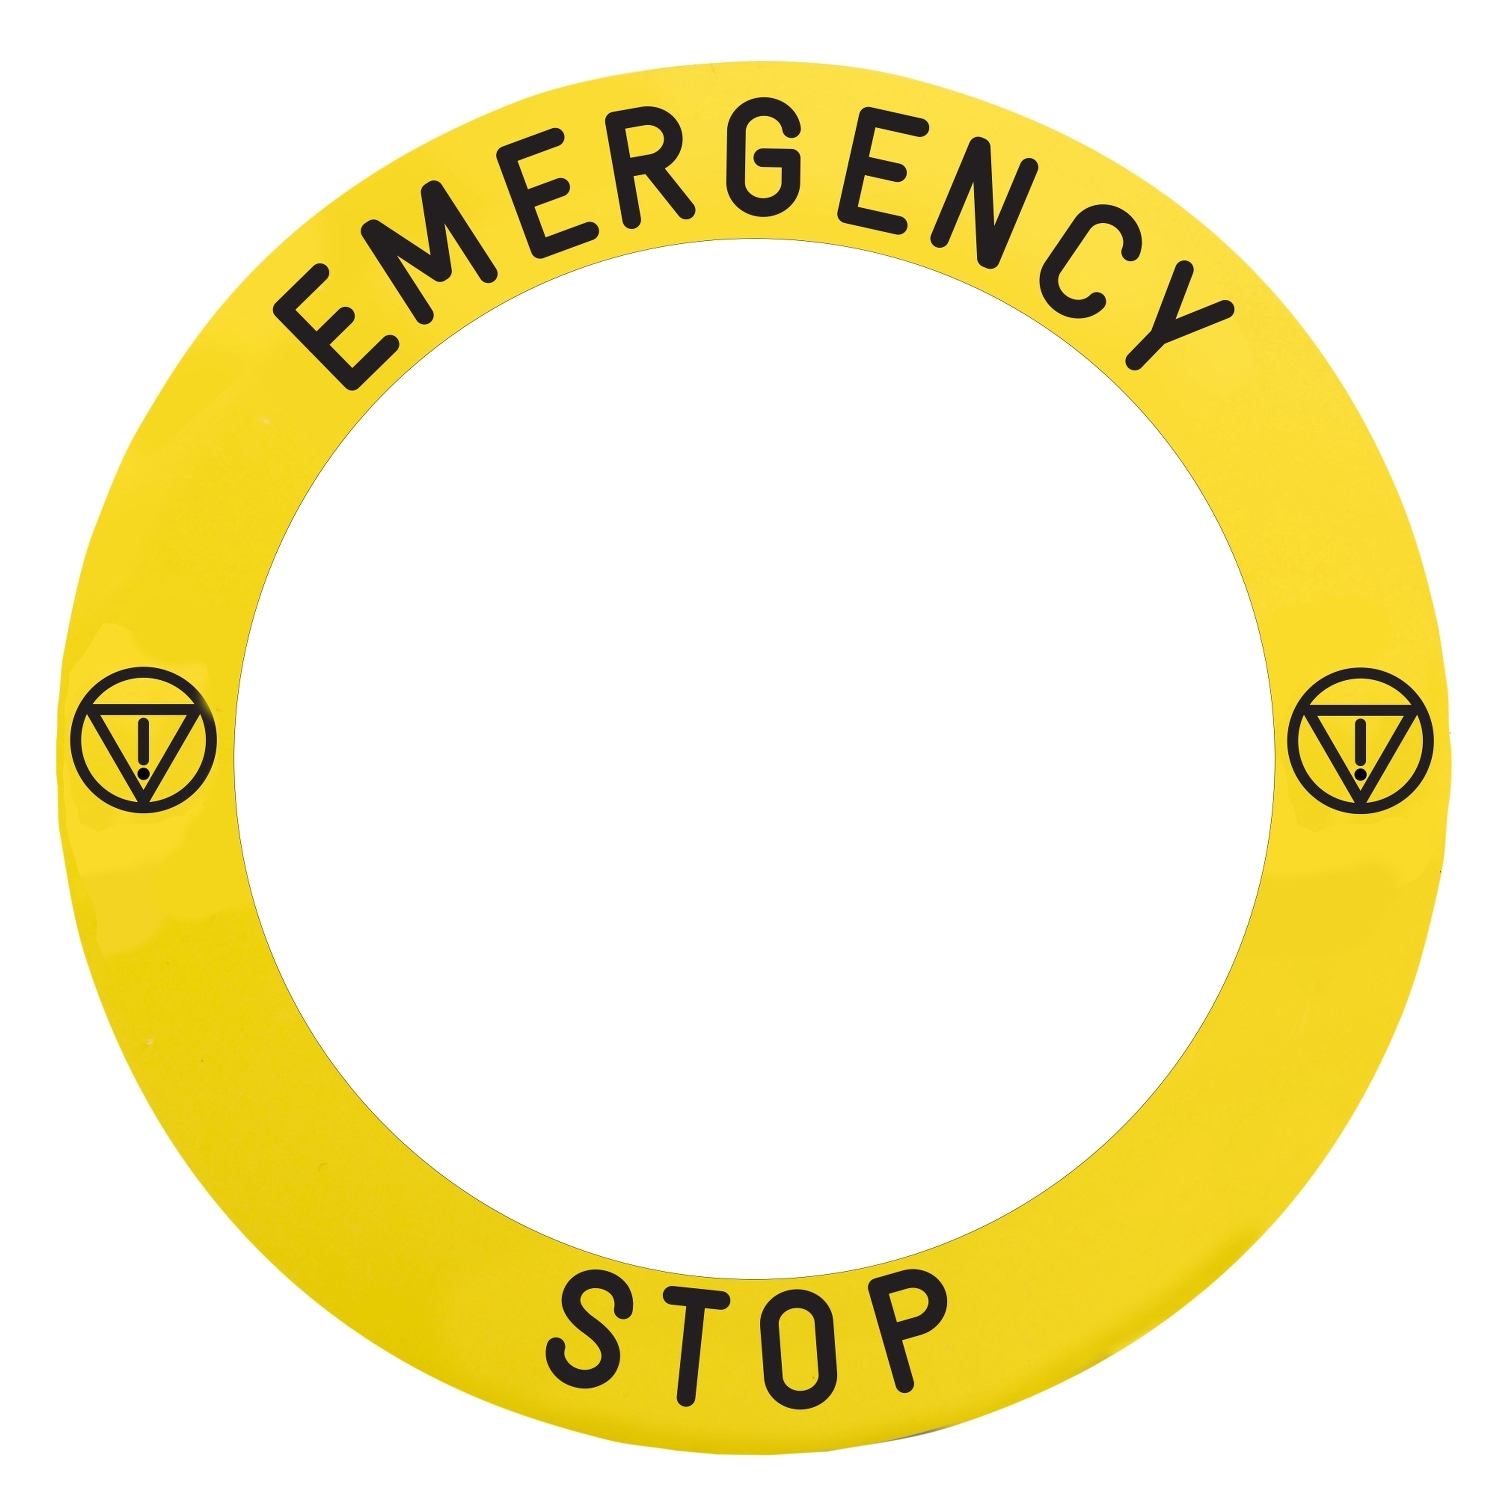 Marked legend, Harmony XB4, Harmony XB5, plate Ø 90 specific for ill. e.stop text EMERGENCY STOP with logo